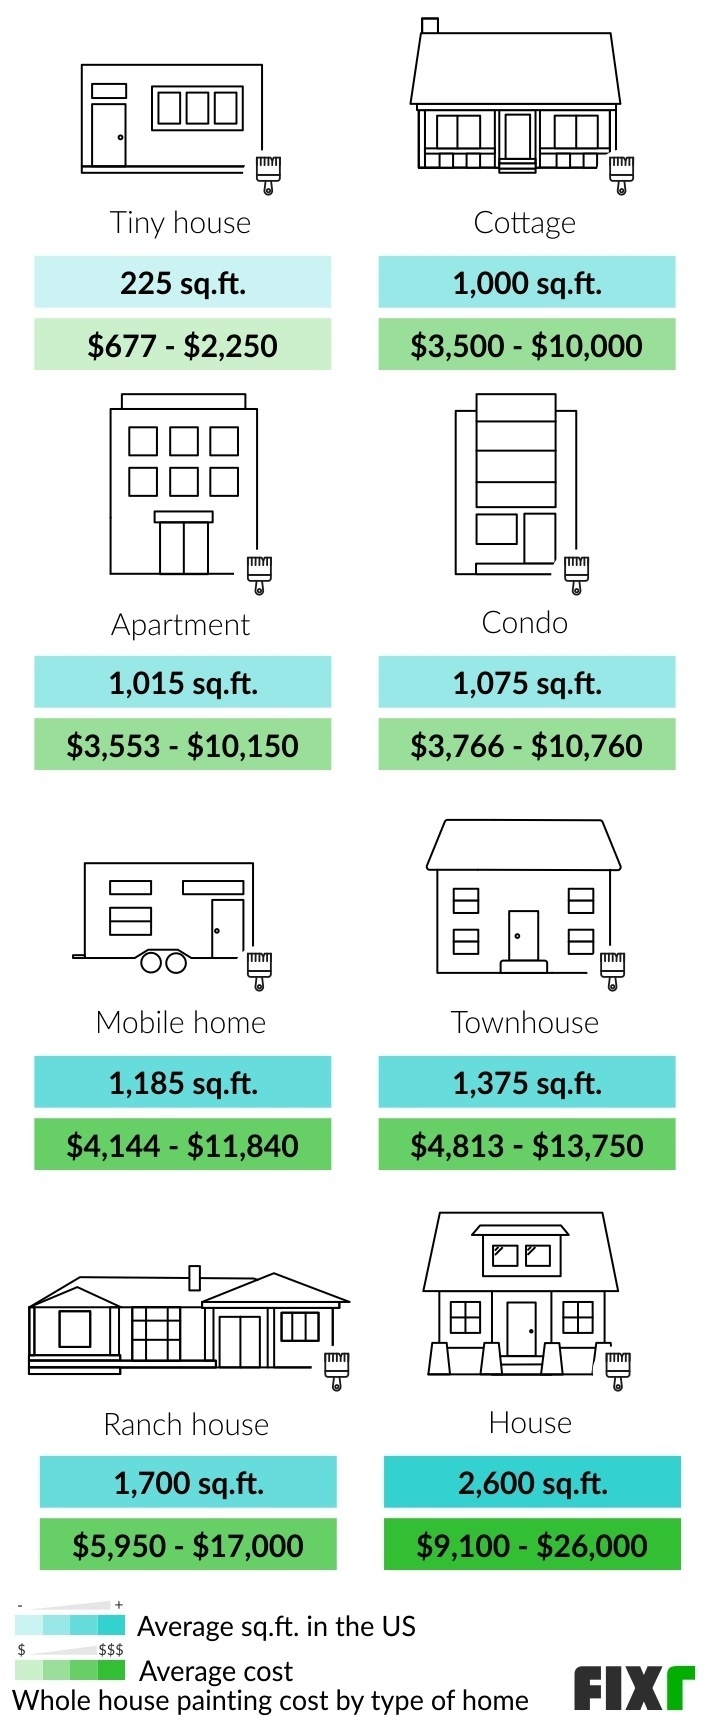 Cost to Paint a Tiny House, Cottage, Apartment, Condo, Mobile Home, Townhouse, Ranch, and House